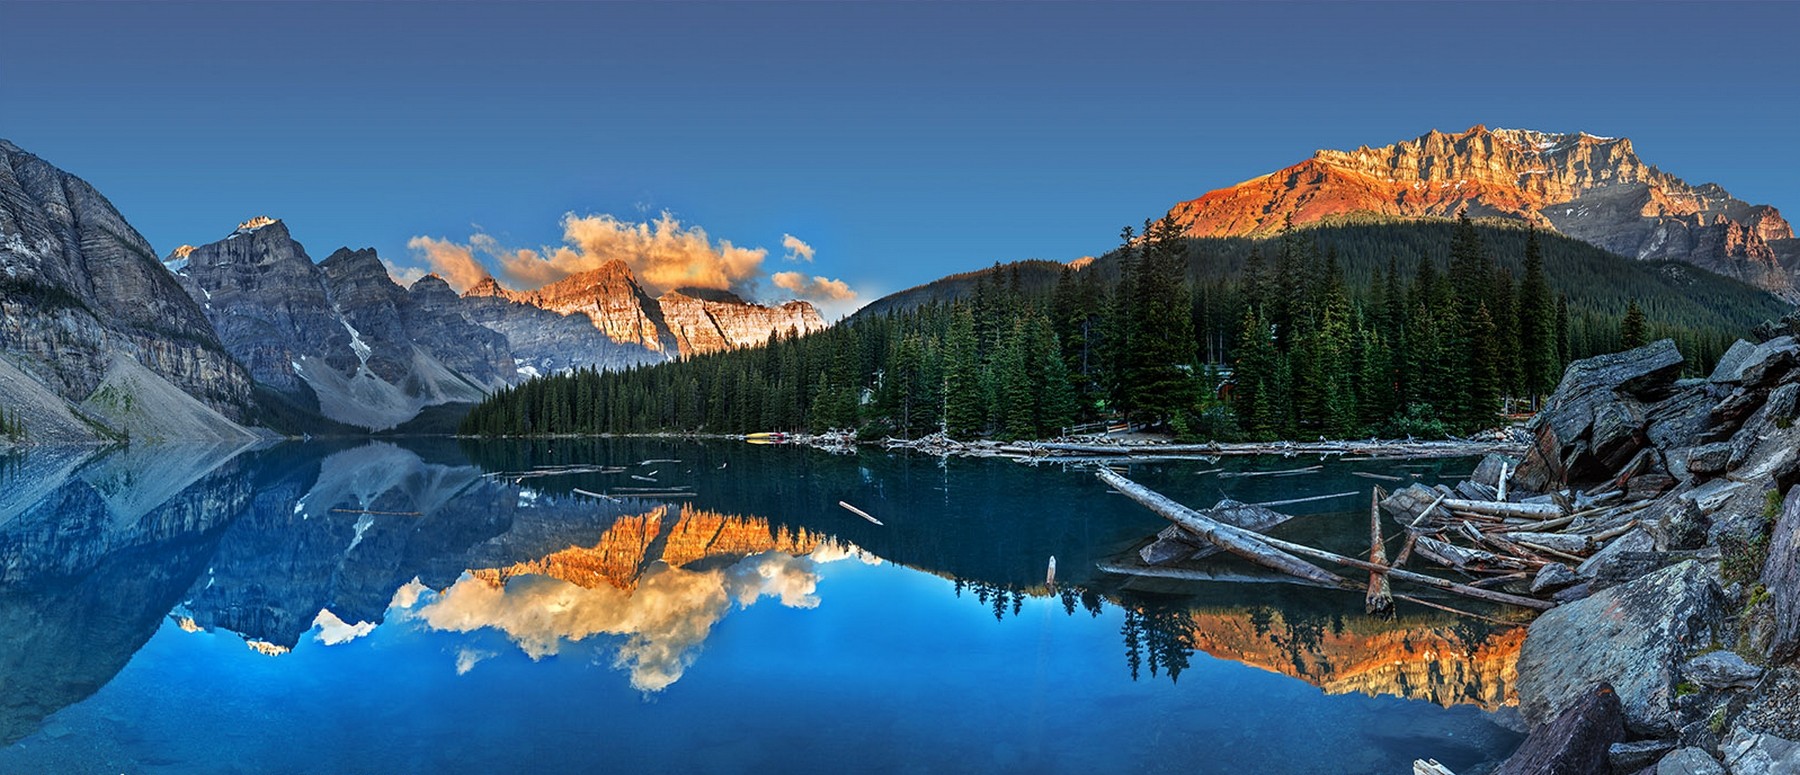 General 1800x775 Moraine Lake sunset summer lake Canada mountains water forest cliff reflection blue clouds nature landscape